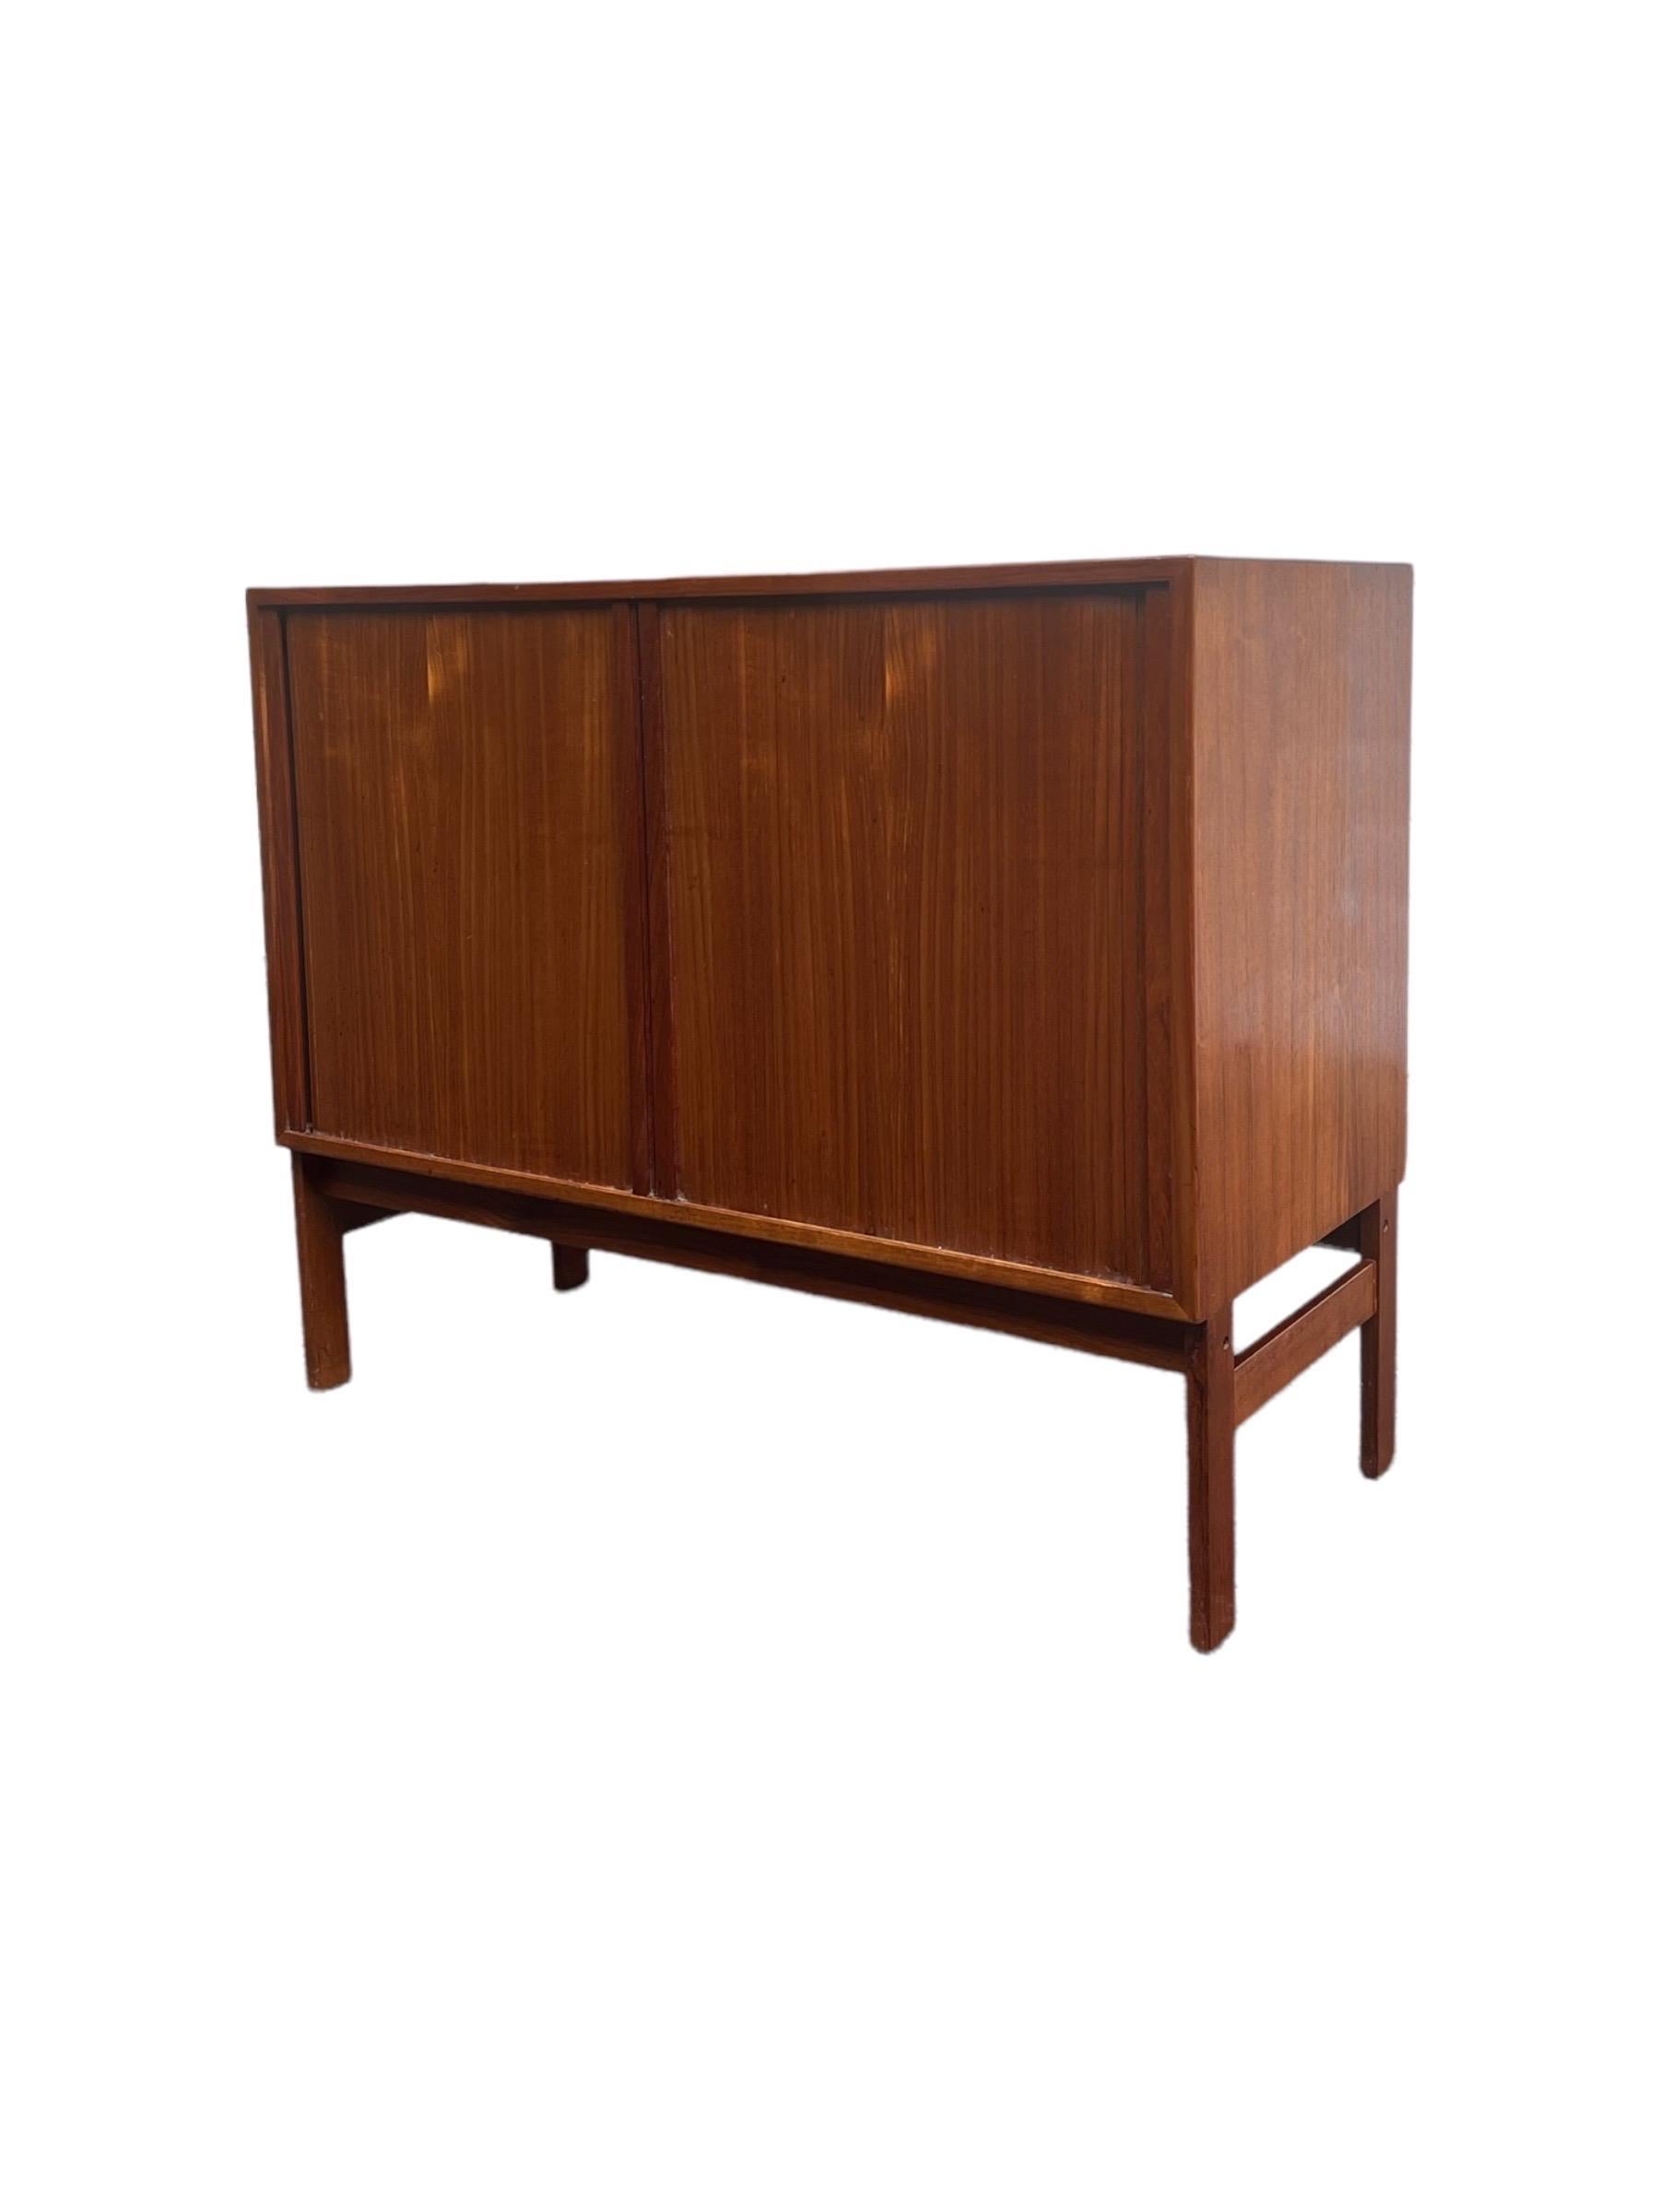 Vintage Danish Modern Tambour door Record cabinet of Credenza Imported. Shelf adjustable and or removable 

Dimensions: 35 W 16 D 29 H.